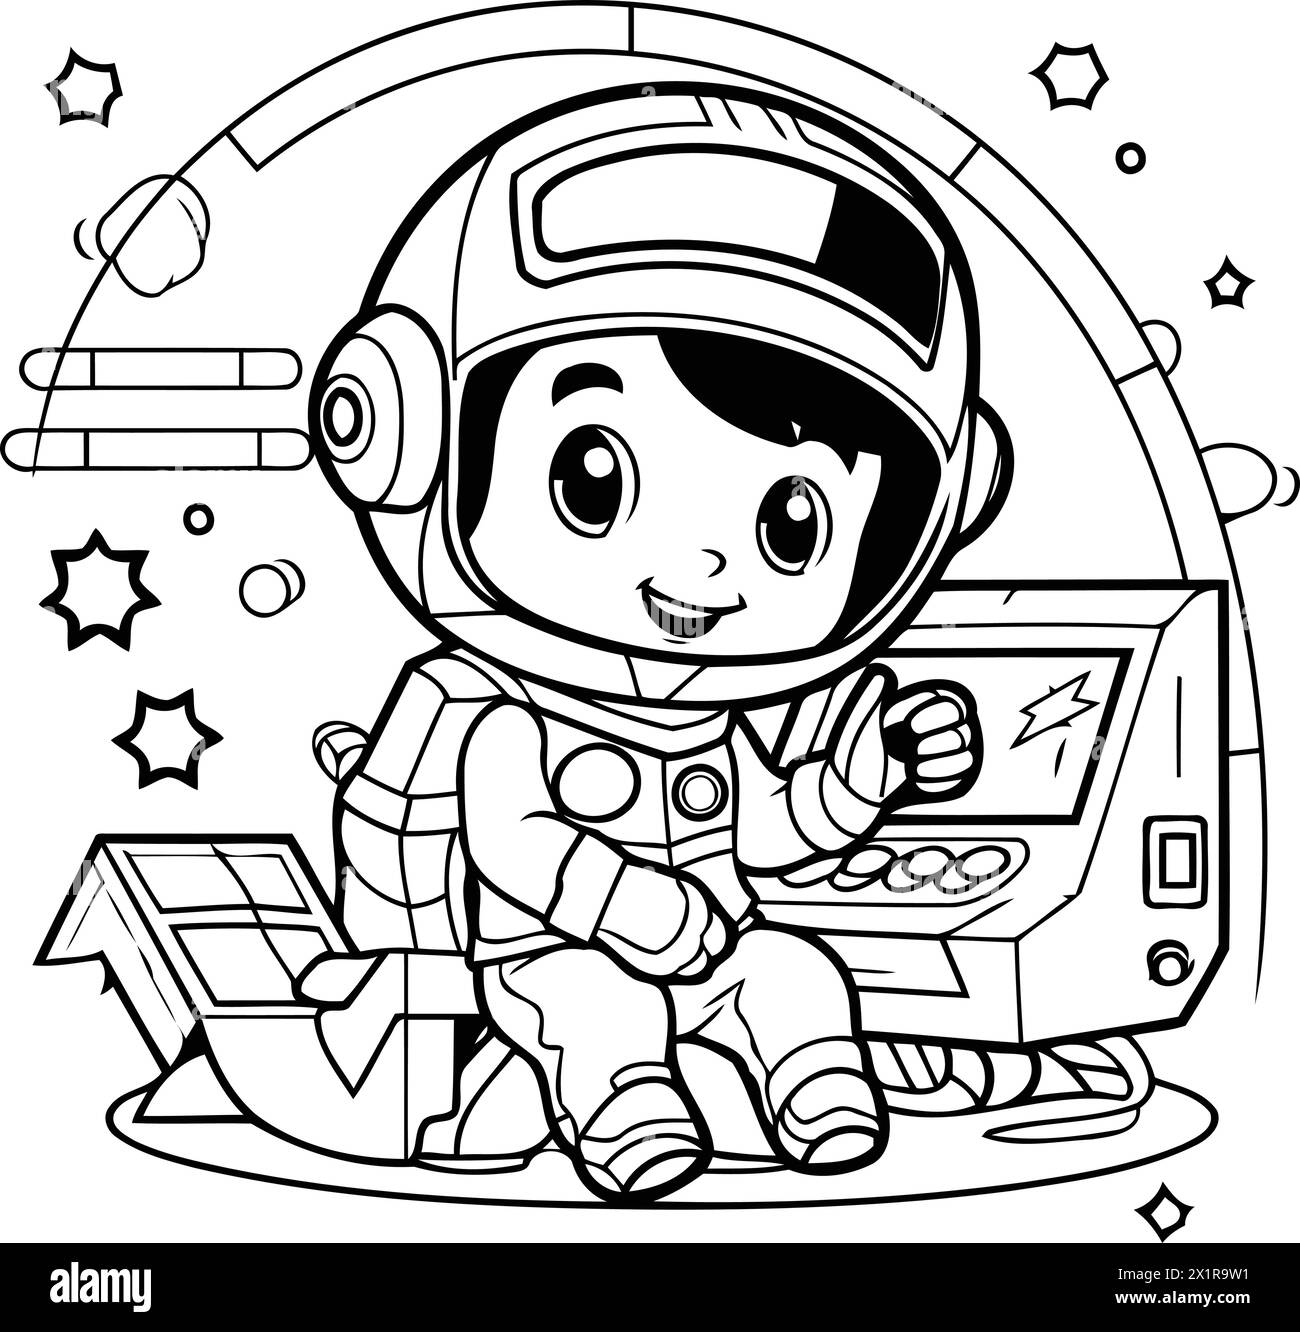 Illustration of a Cute Kid Boy Wearing a Astronaut Helmet Sitting in Front of a Space Station Stock Vector